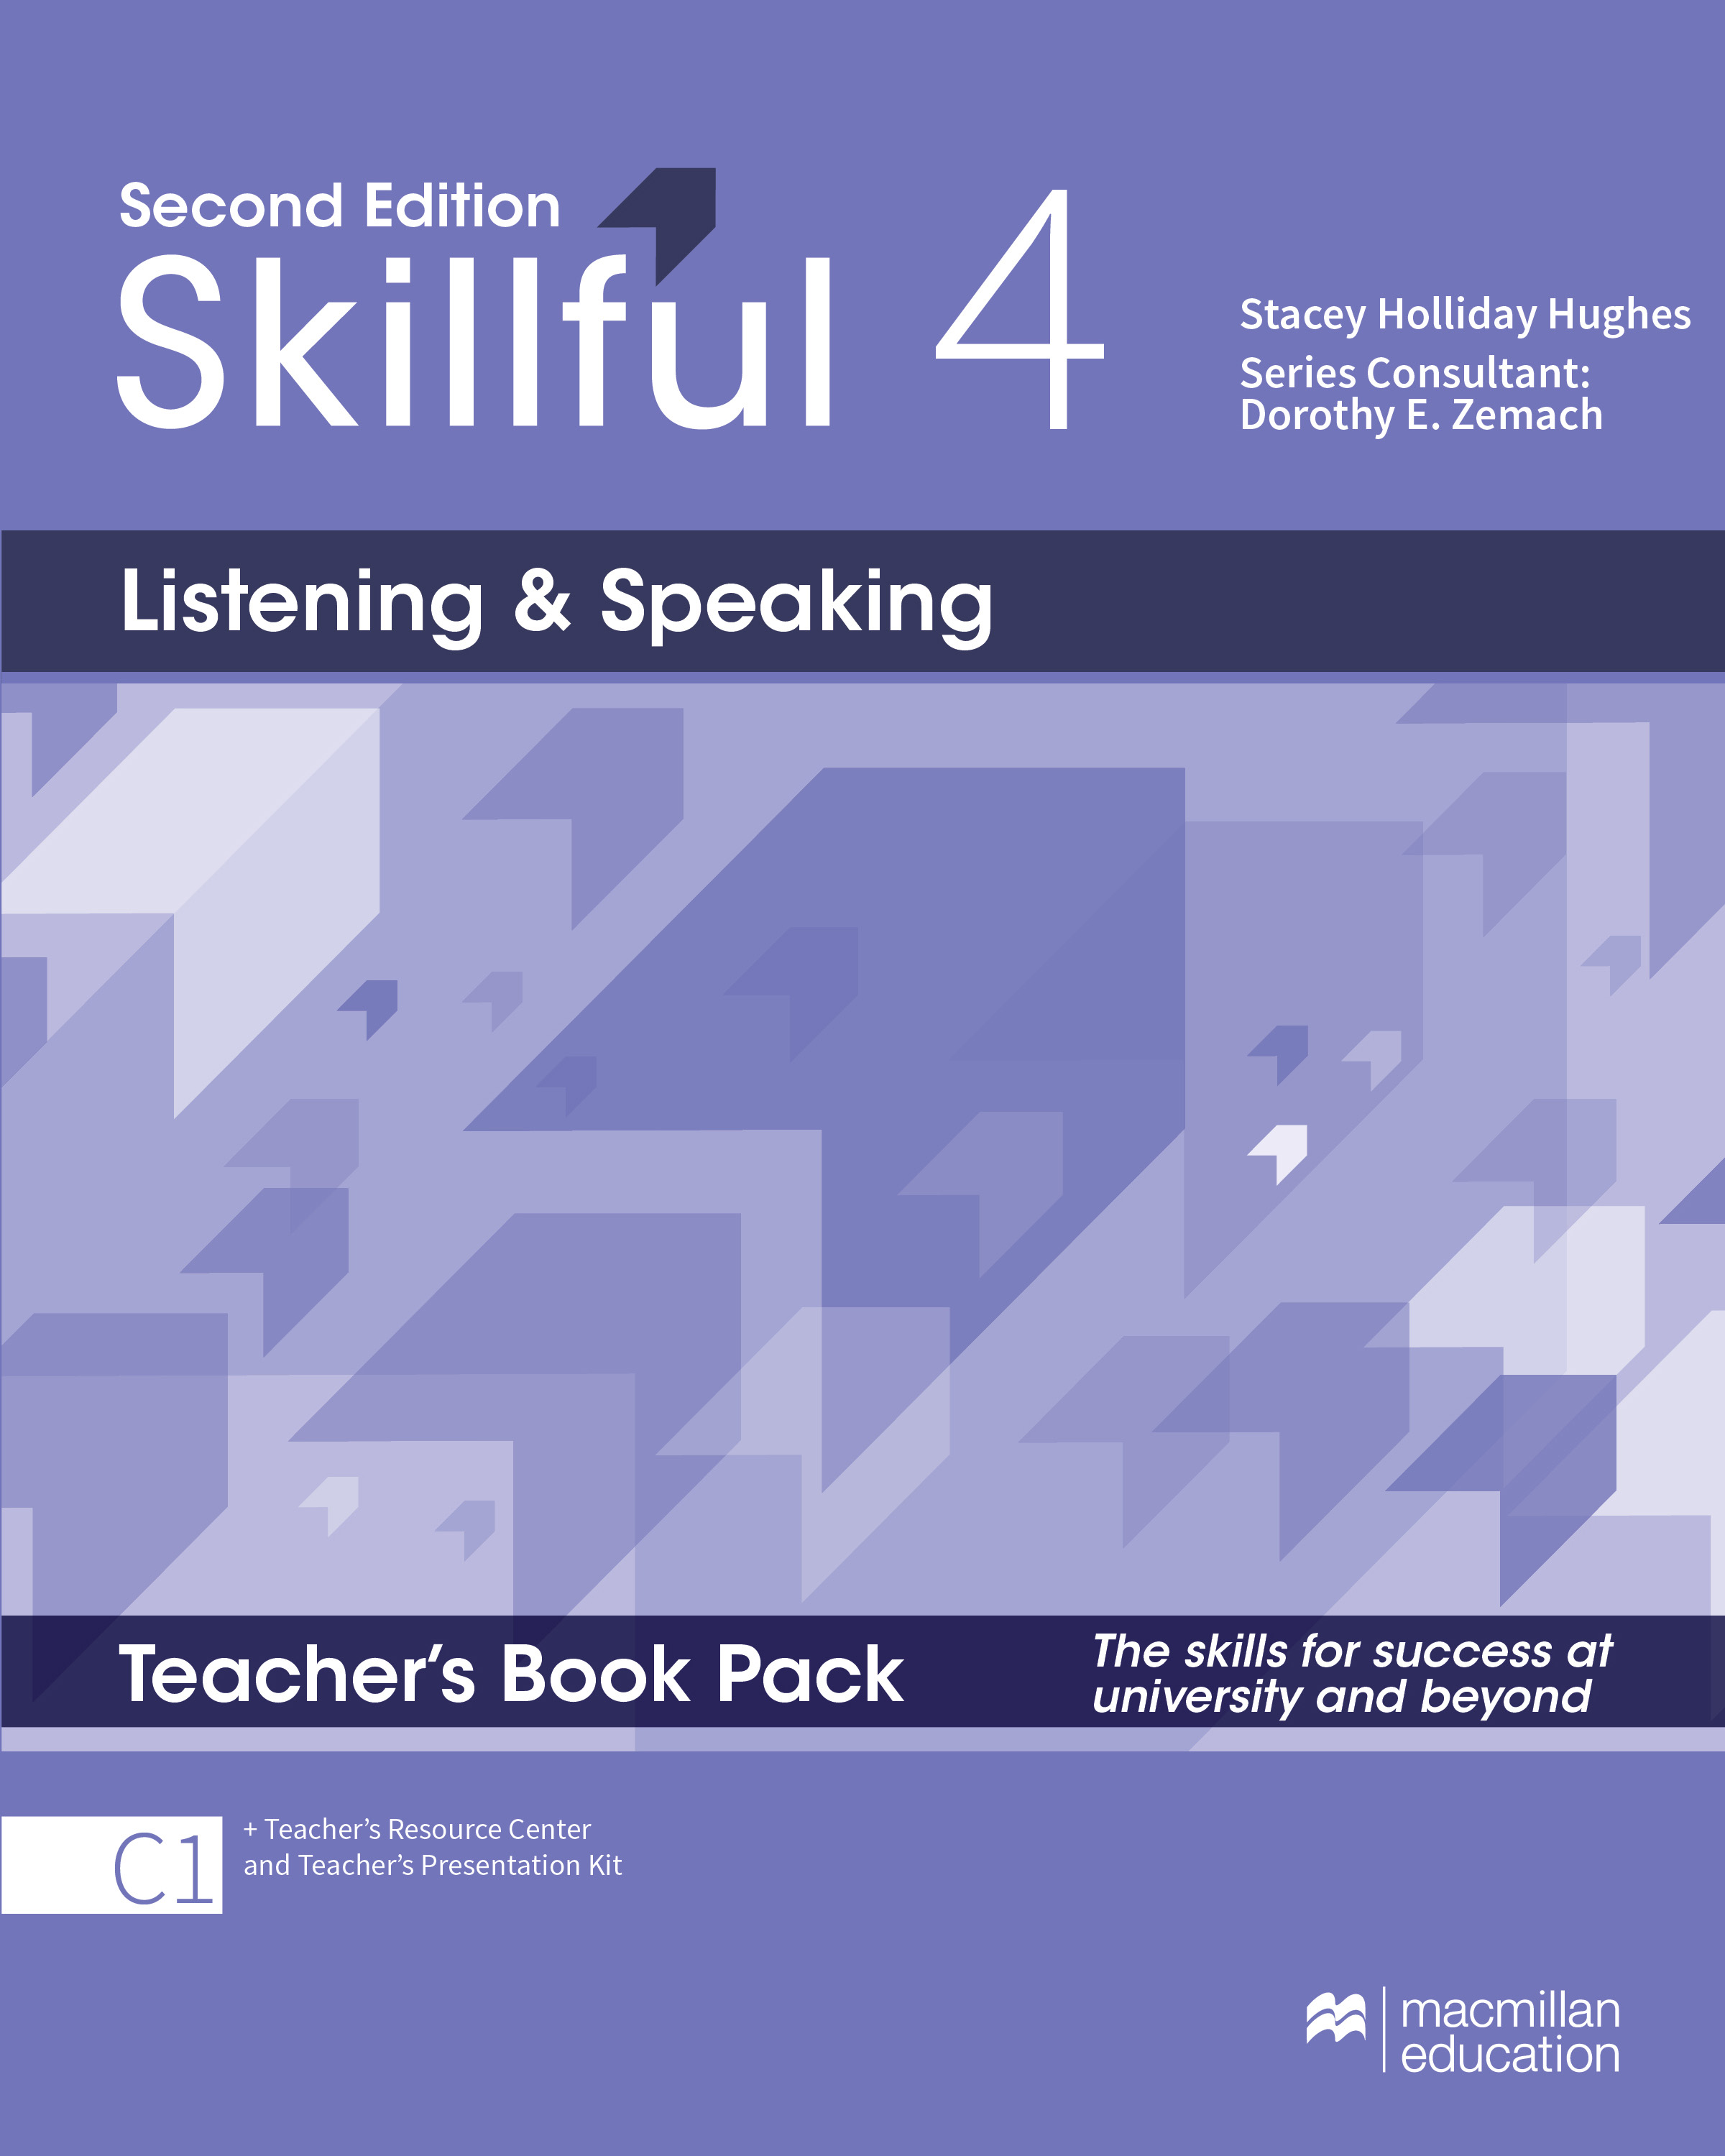 Skillful t. Skillful Listening and speaking 2. Skillful Listening and speaking. Skillful Listening and speaking 4. Skillful Listening and speaking 3 teacher's book.